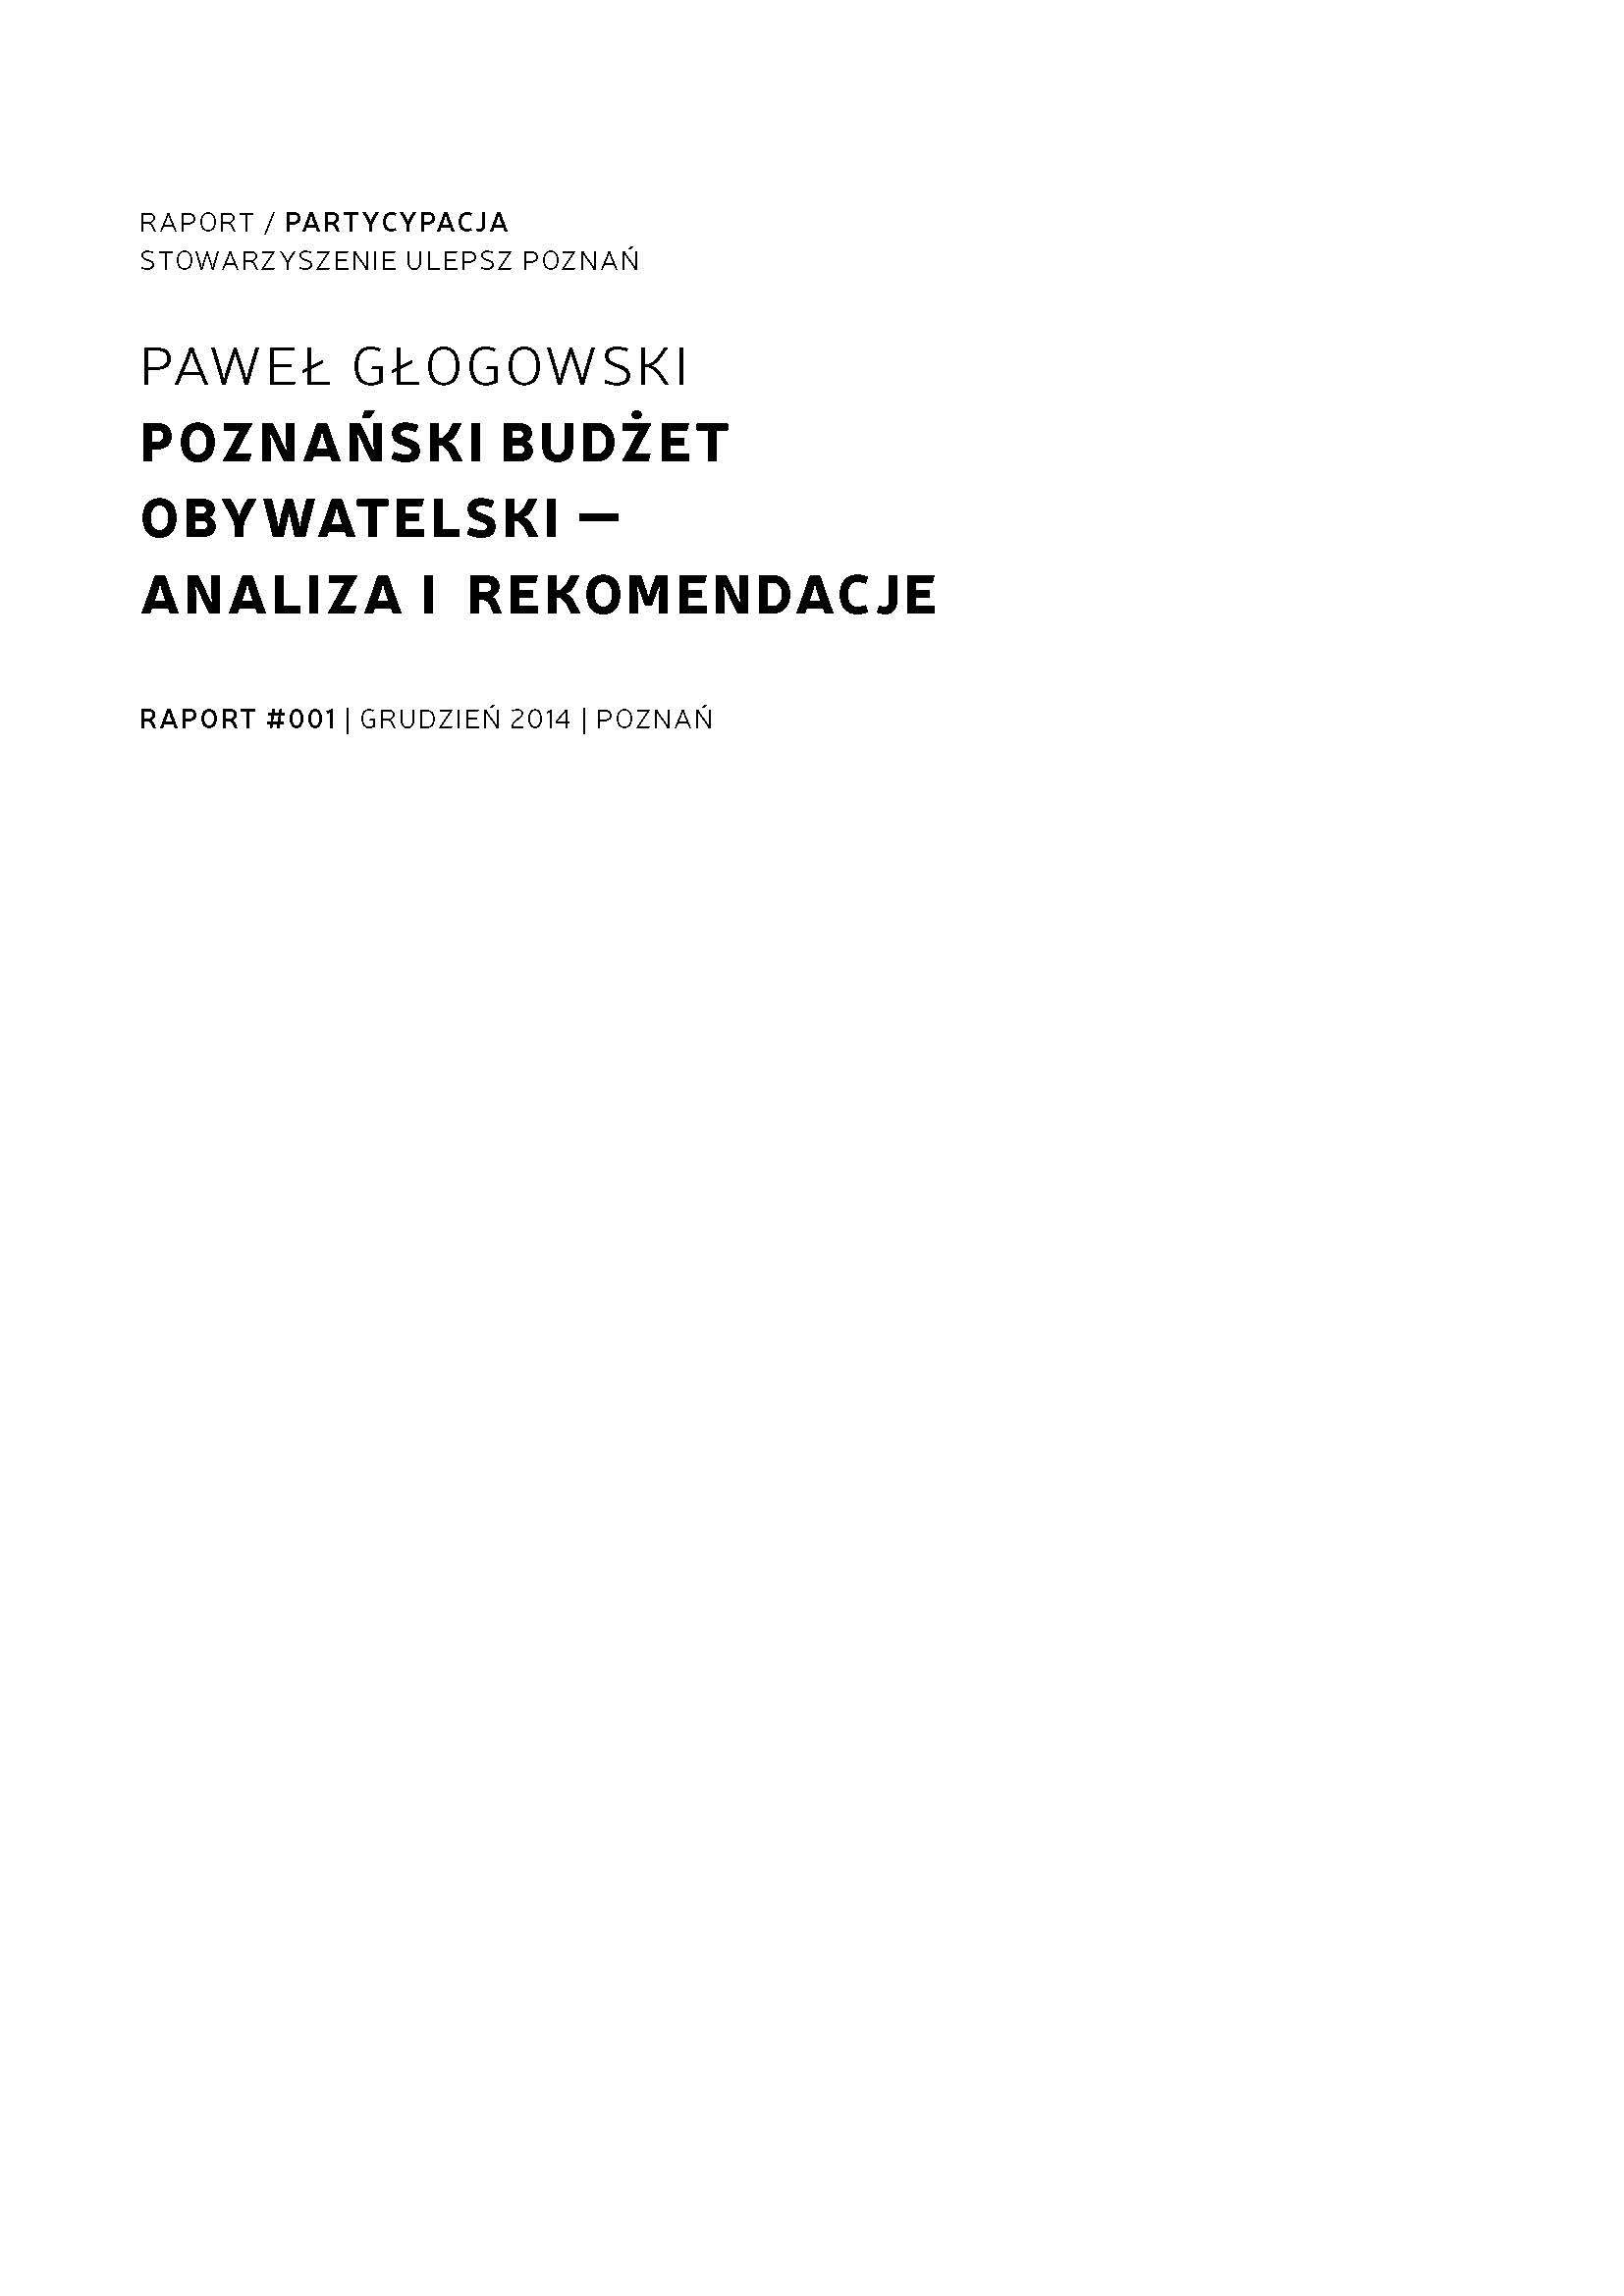 Poznan Participatory Budget - Analysis and Recommendations Cover Image